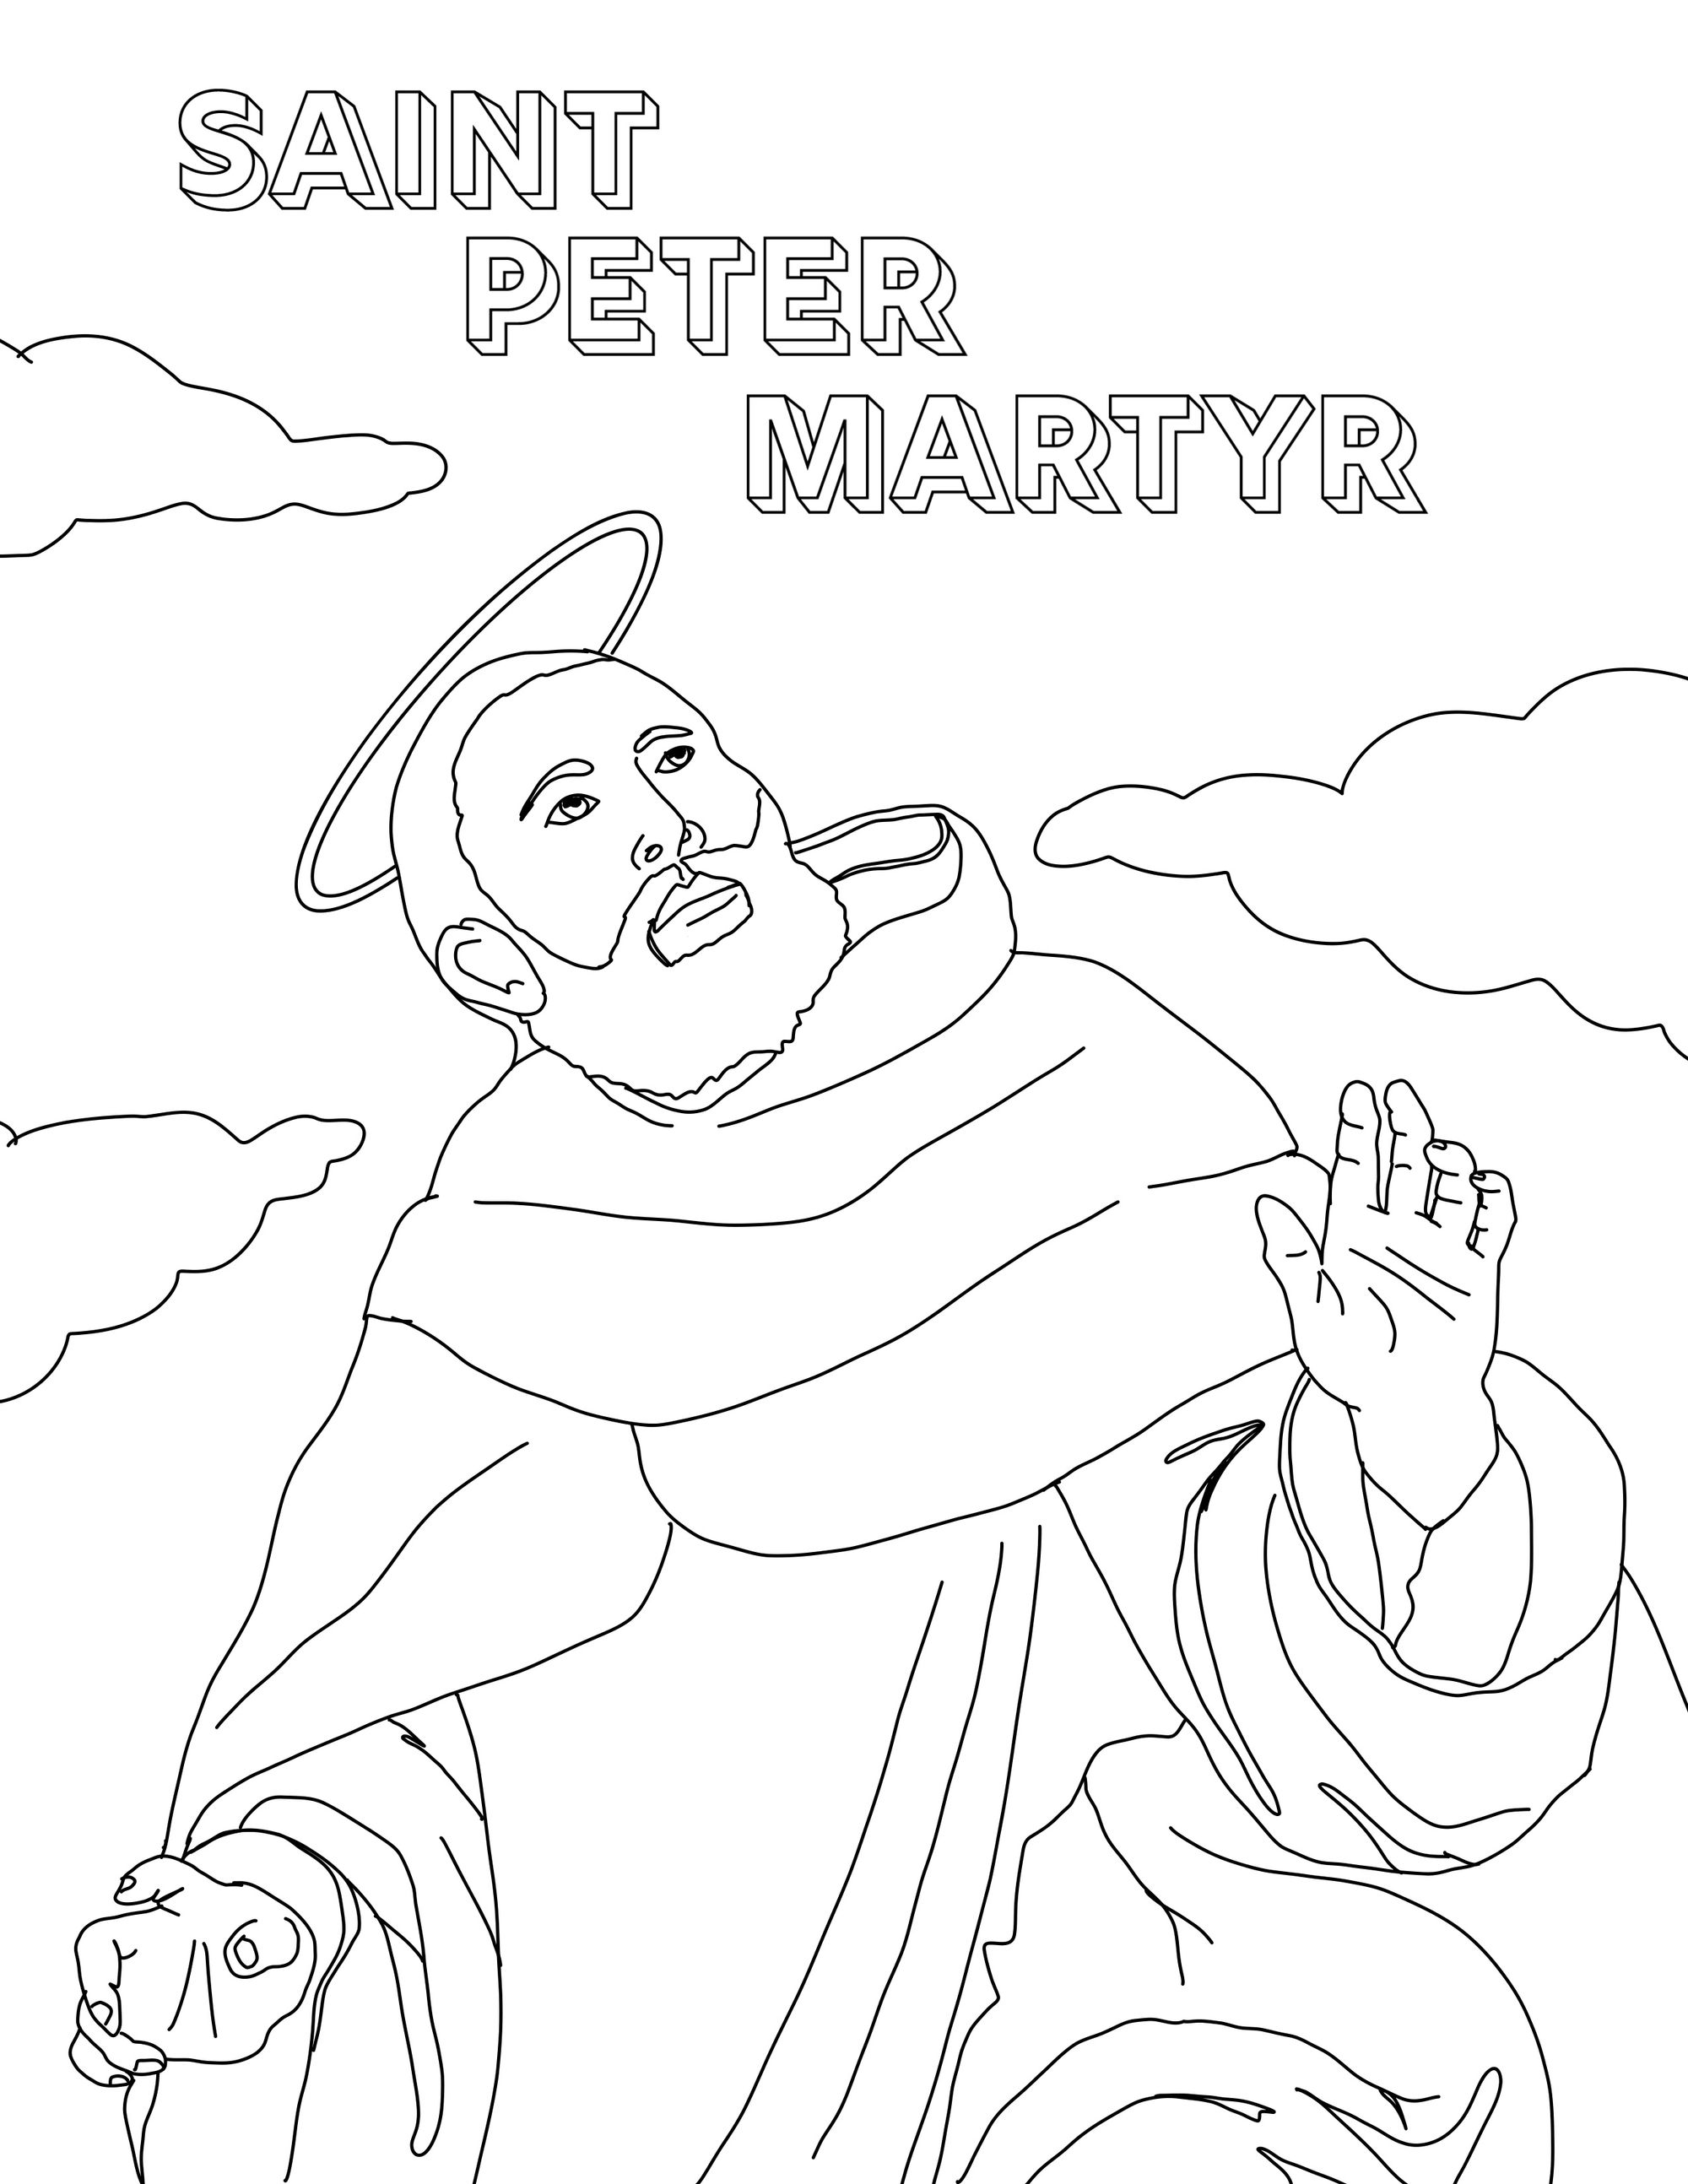 saint-peter-martyr-catholic-coloring-page